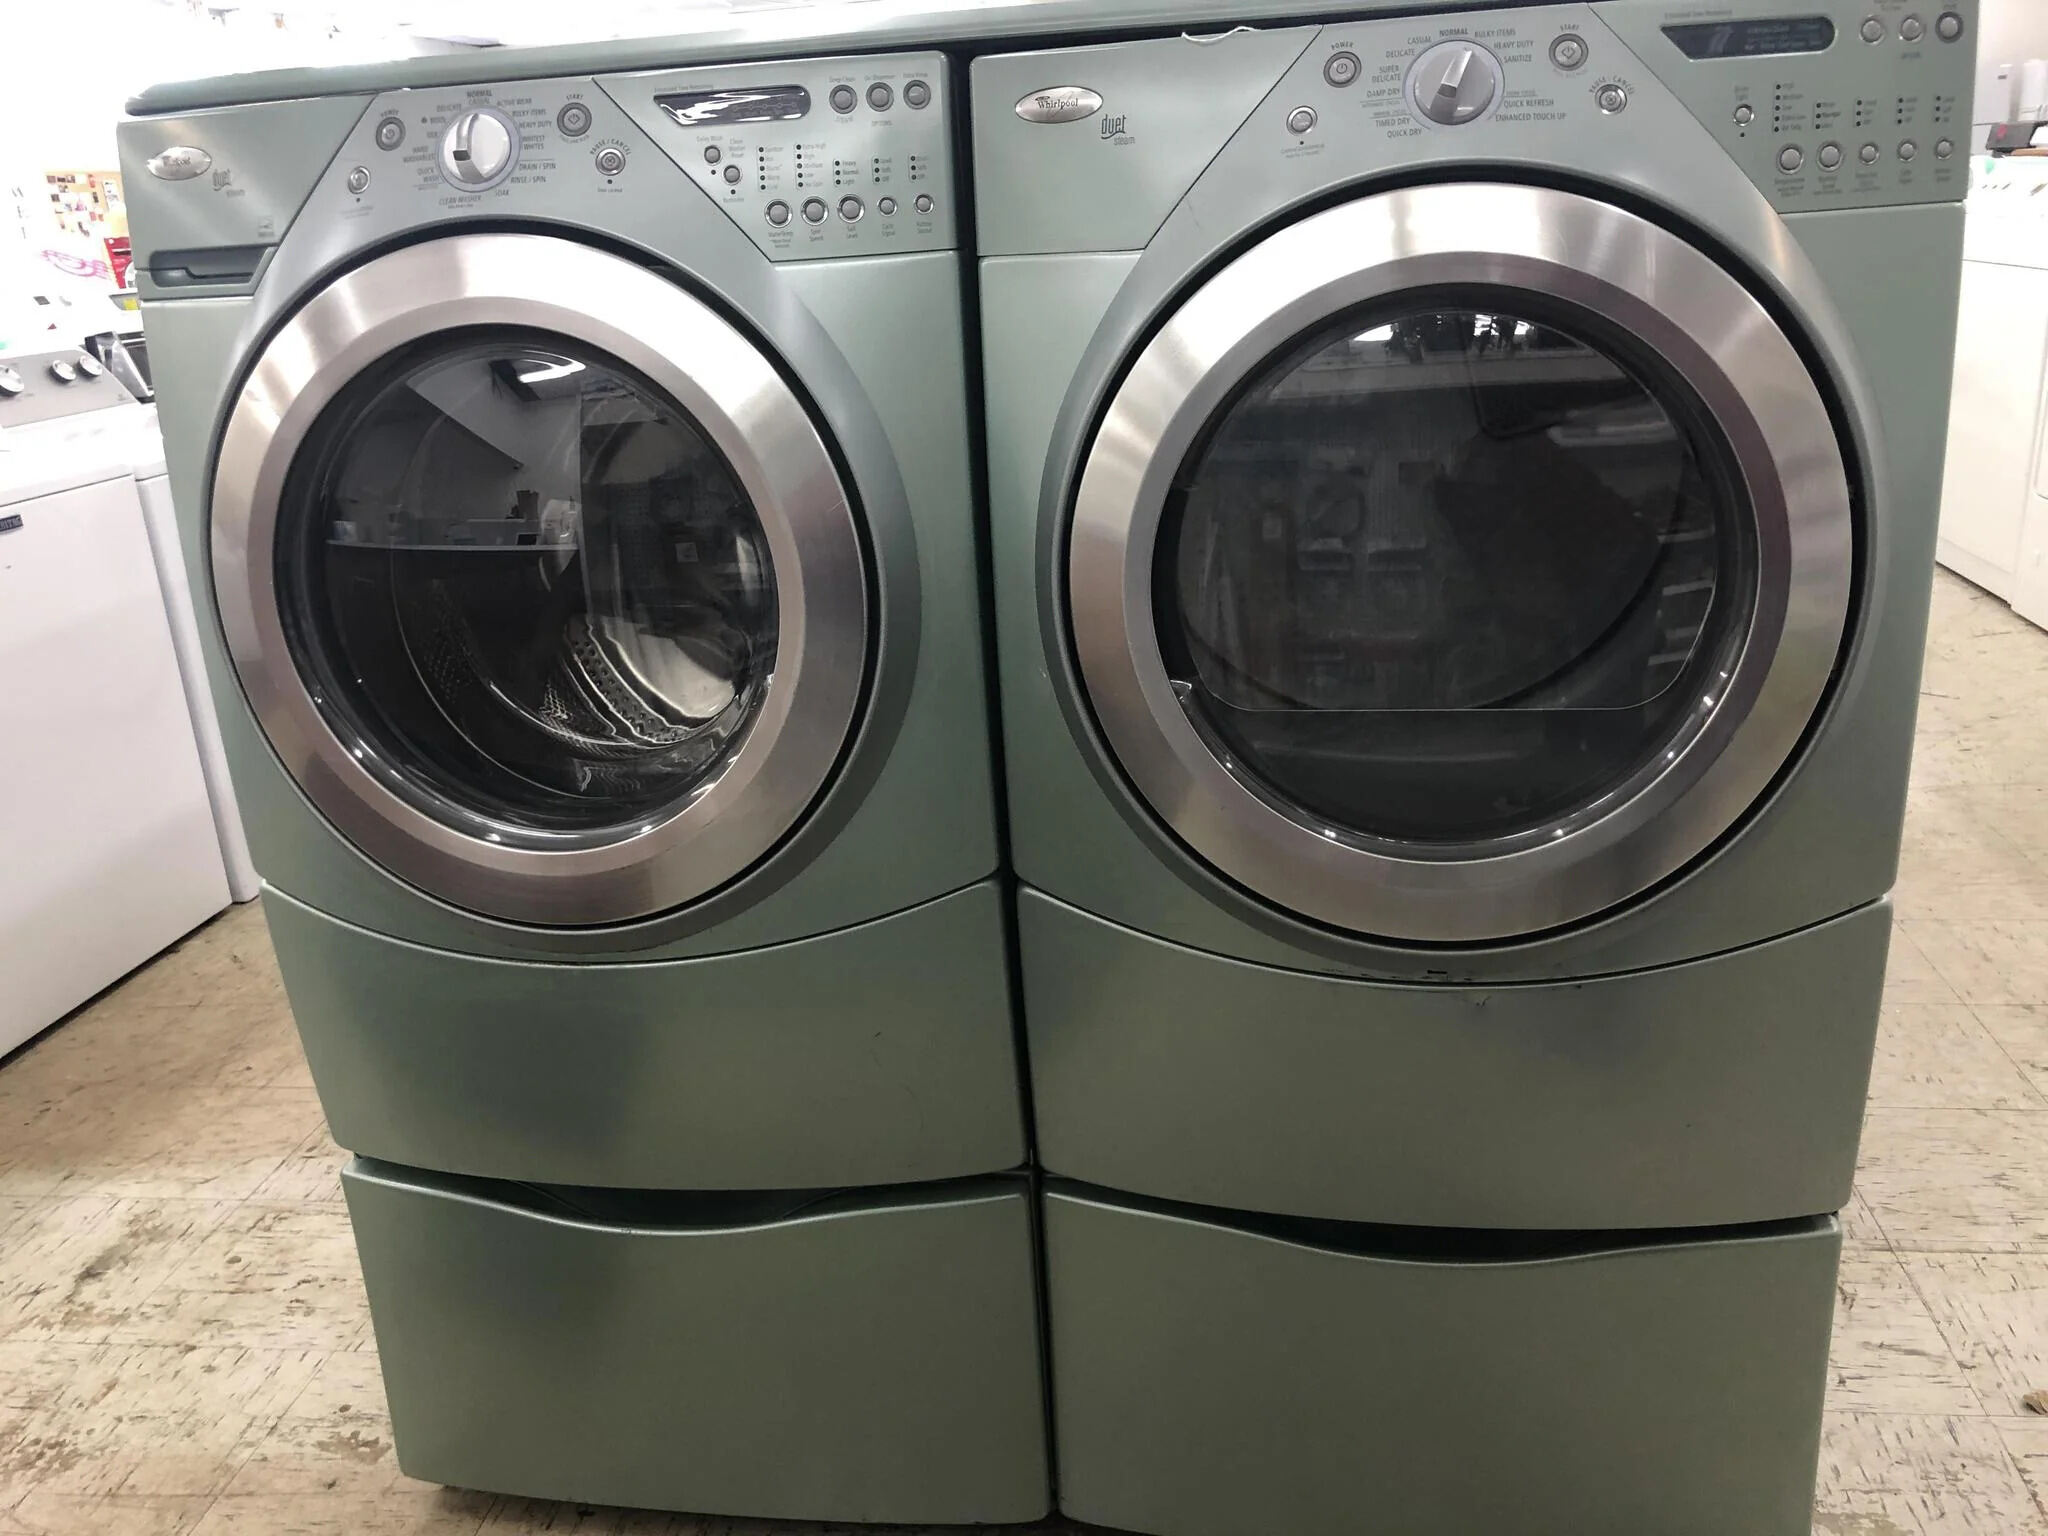 How To Fix The Error Code F03 For Whirlpool Washer